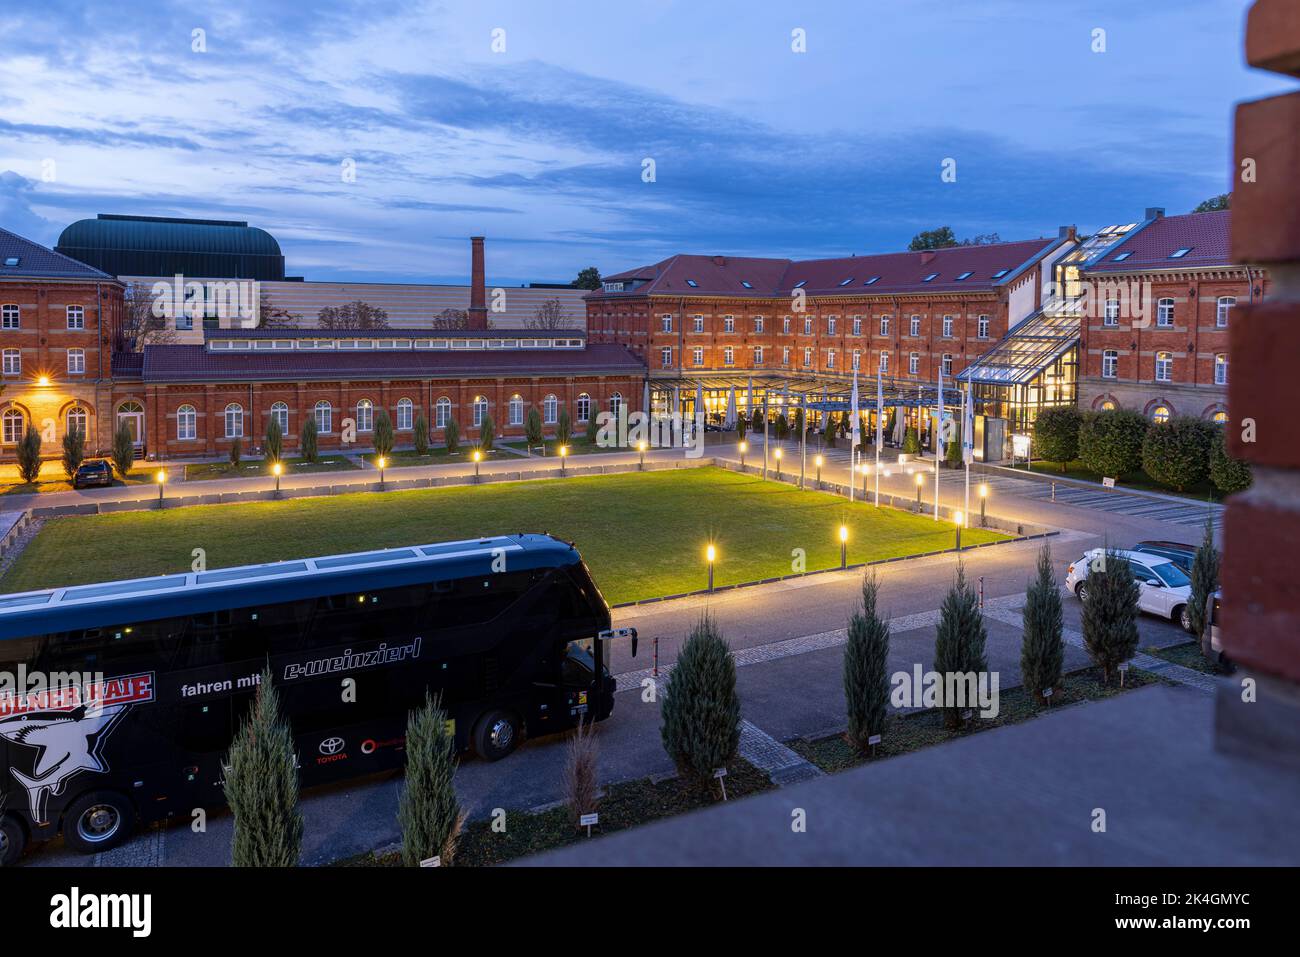 Historical German barrack building turned into a hotel Stock Photo